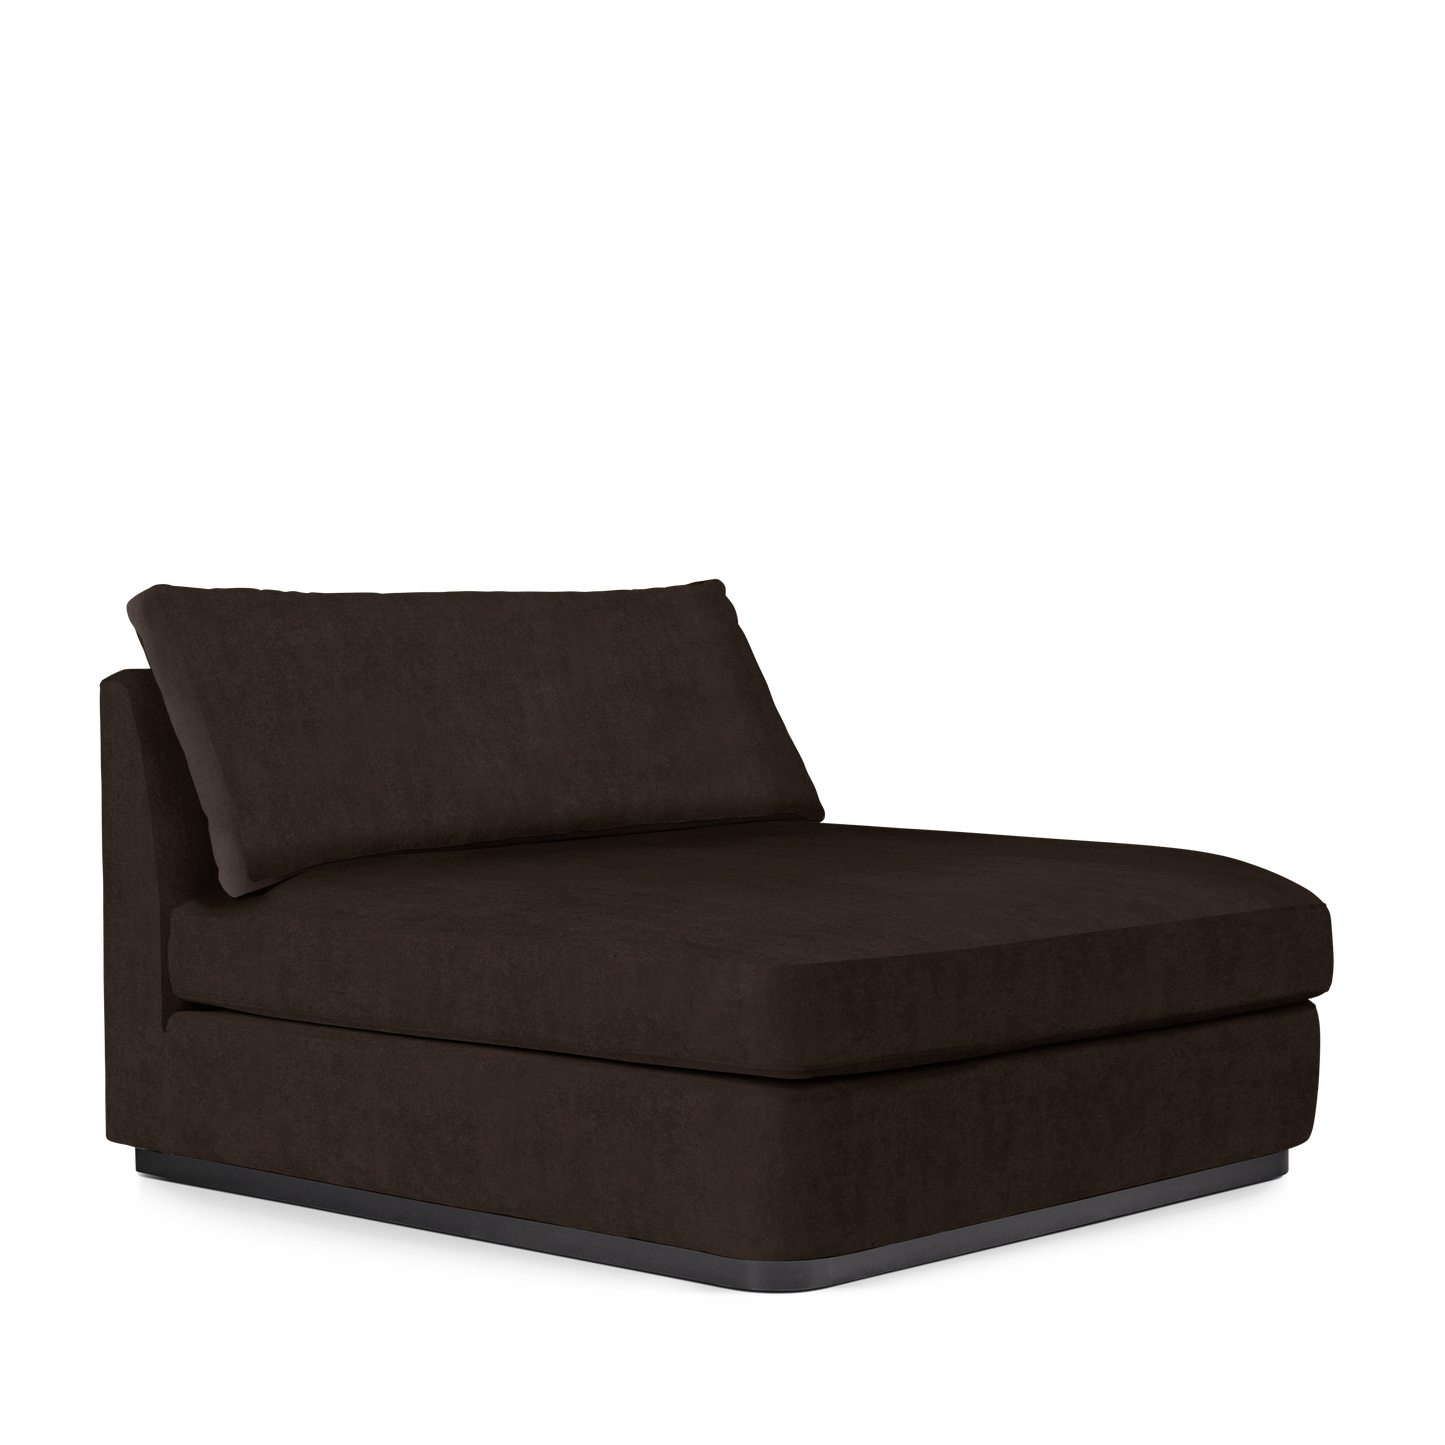 CALMA Lounge Bed with London dark brown textile 